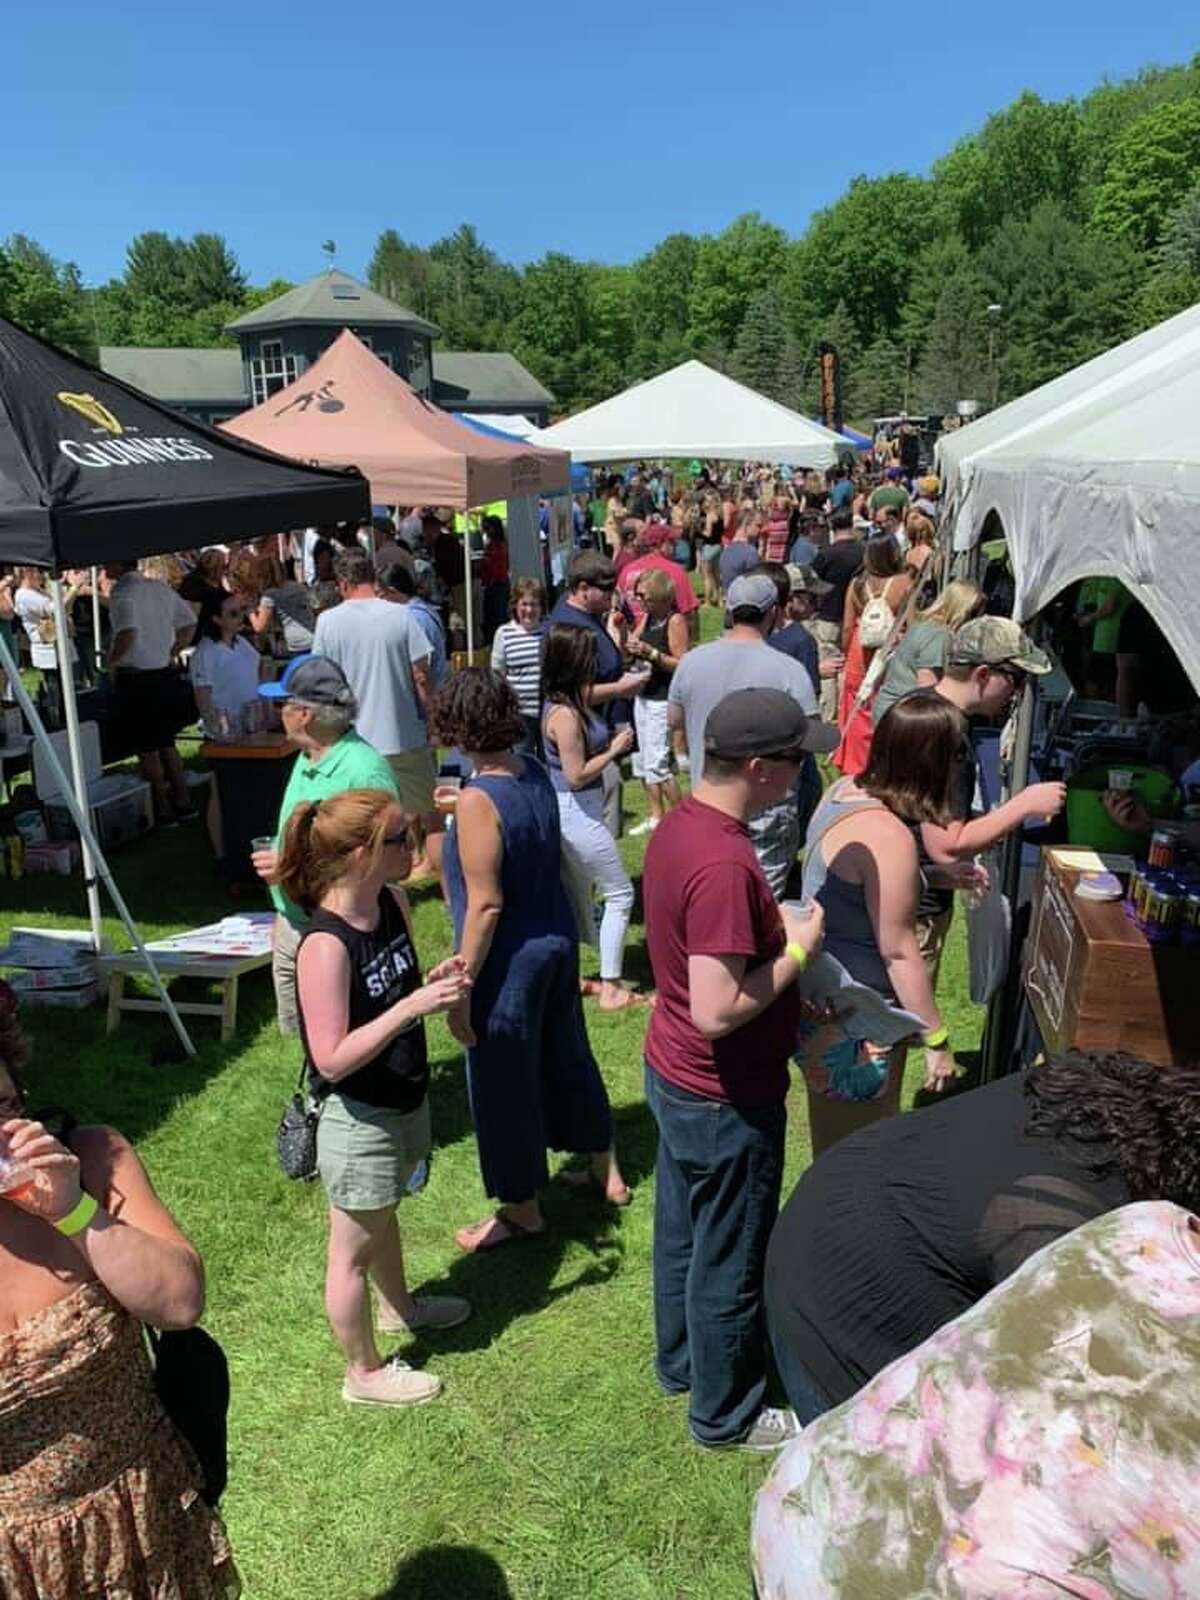 St. Maron Church, Brooker Memorial and Ski Sundown have joined together to hold the 11th Annual Litchfied Hills Brewfest at Ski Sundown, presented by Torrington Savings Bank on June 11.